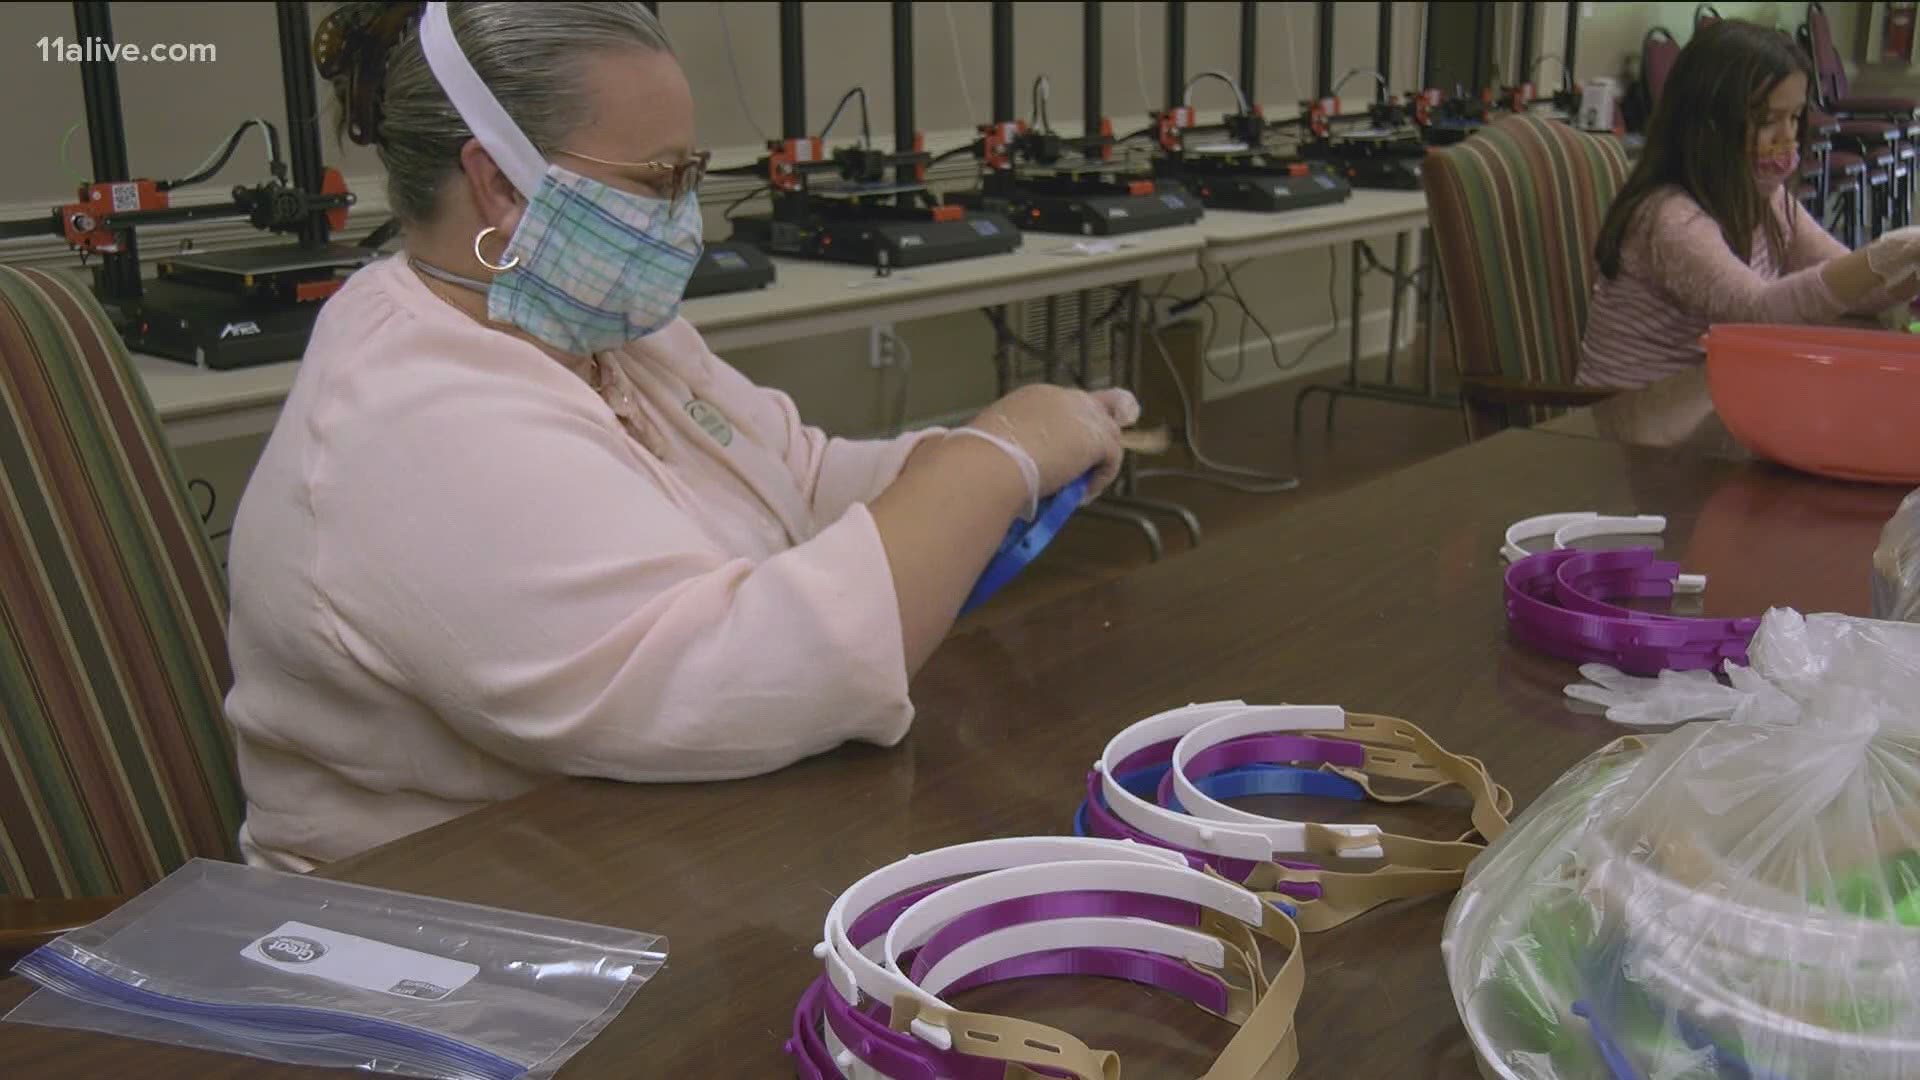 After receiving an urgent request for face shields, the Paulding County Chamber of Commerce mobilized volunteers and 3D printers to meet the challenge.